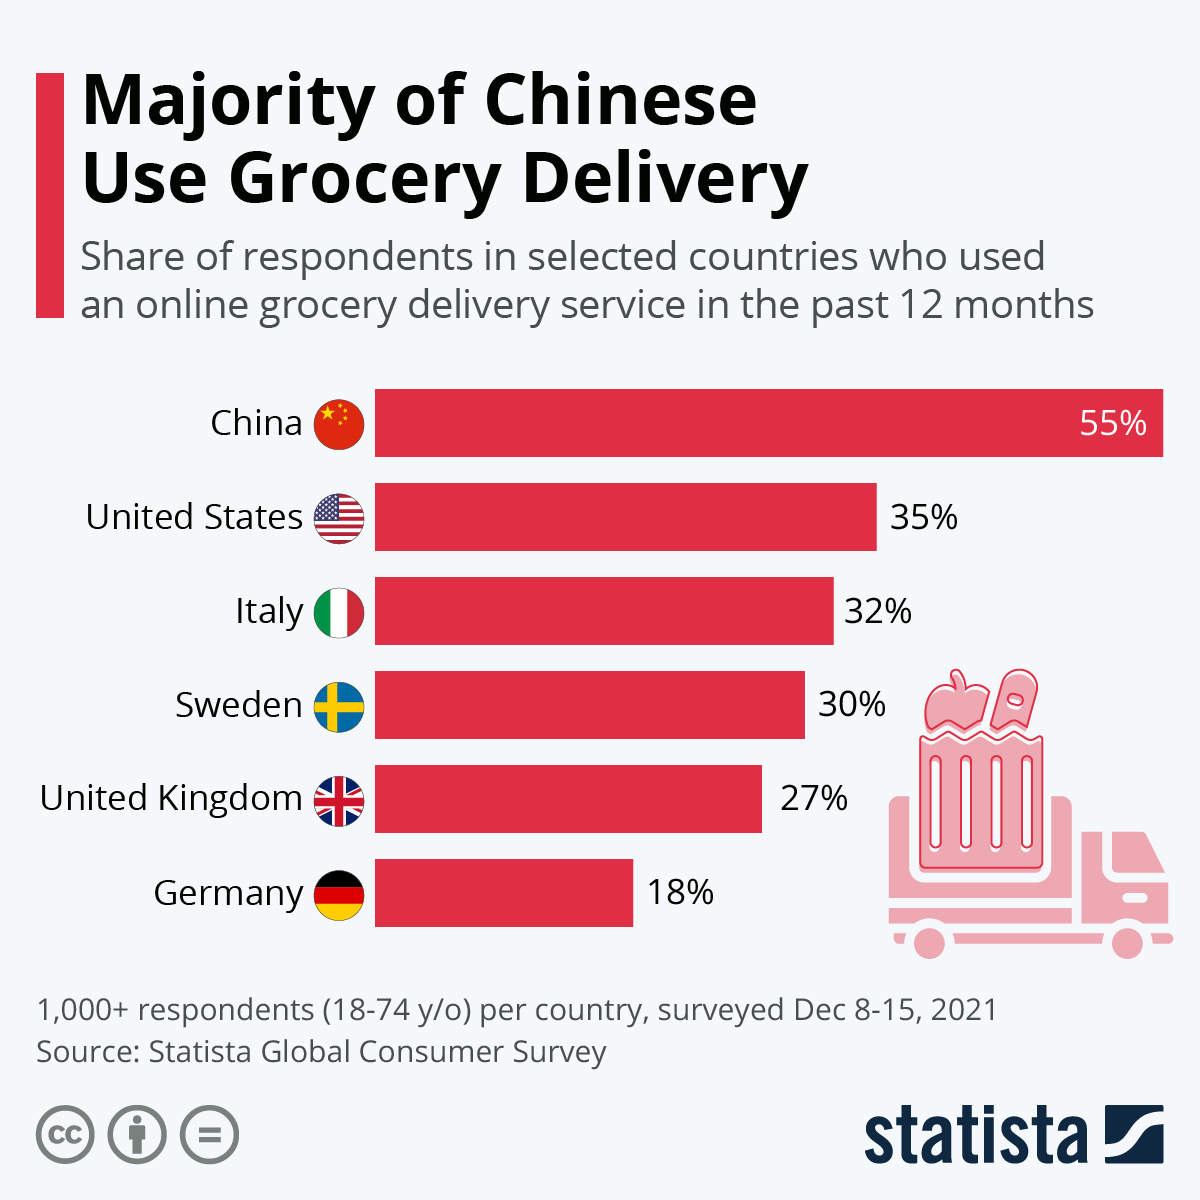 Majority of Chinese Use Grocery Delivery